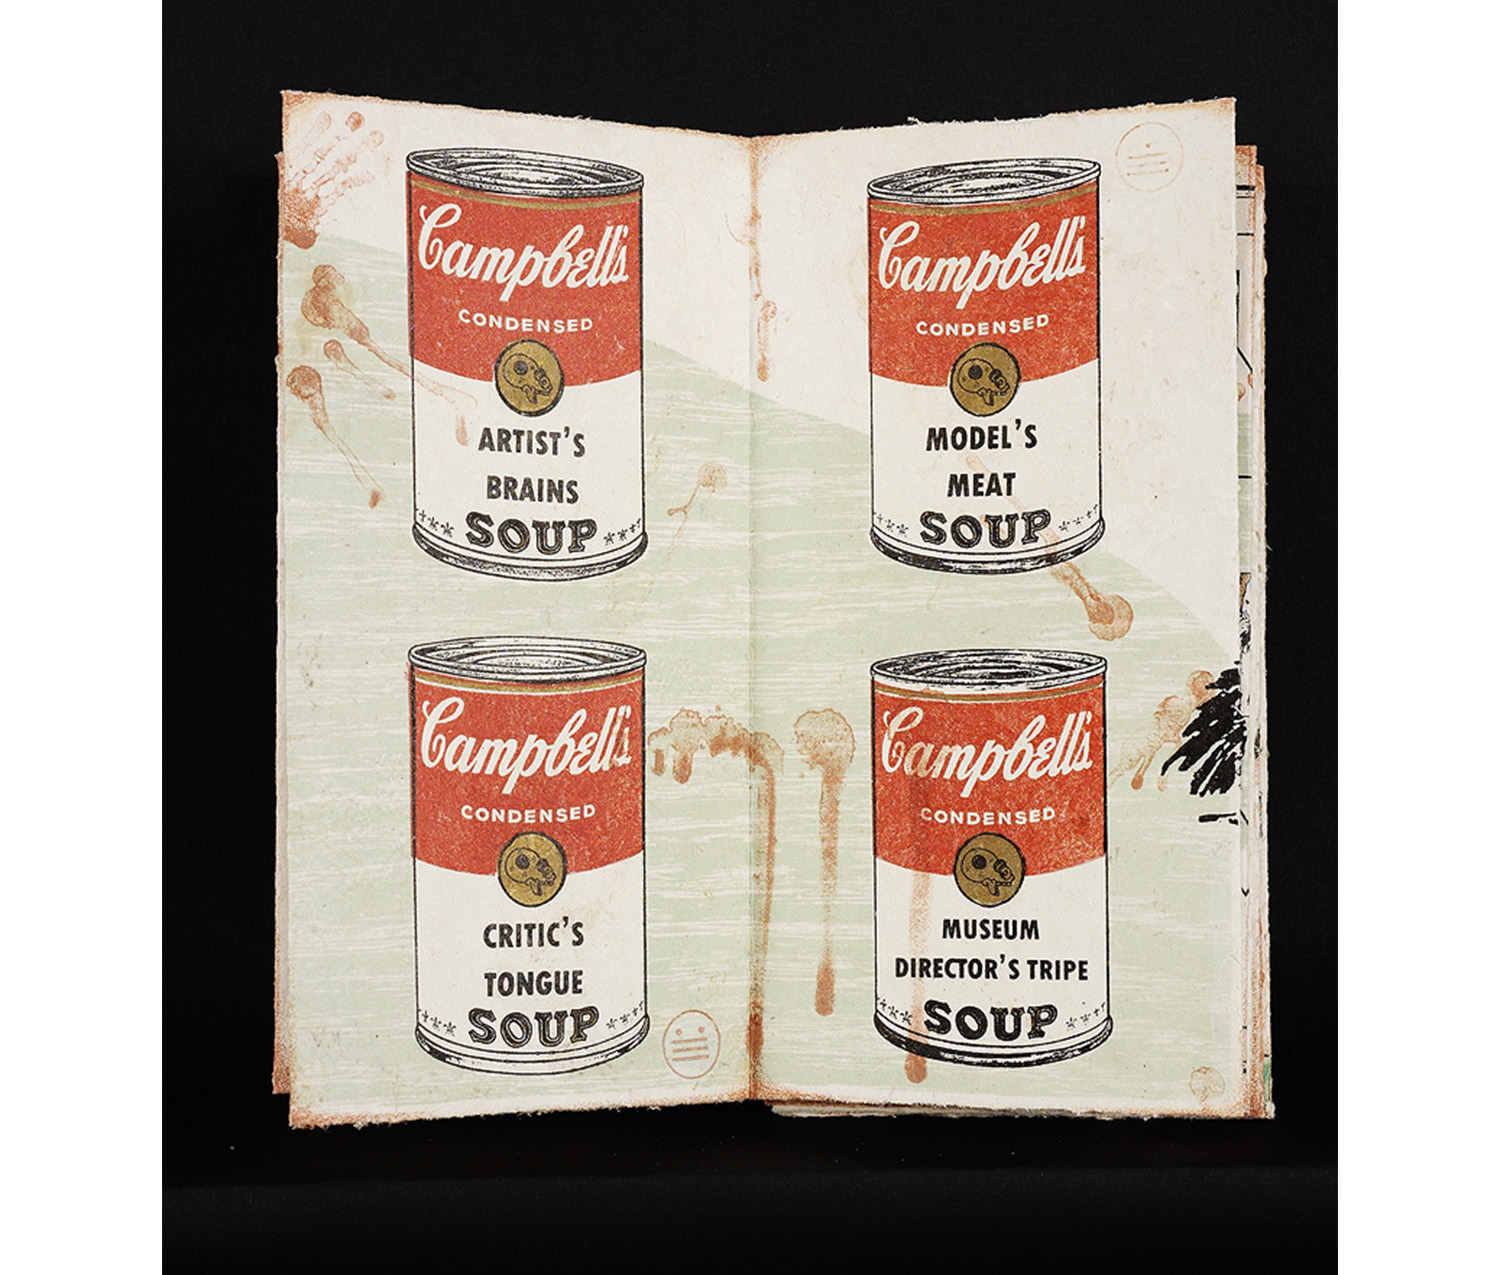 An open book displaying prints of four cans of Campbell’s Soup. The can on the top left says “Artist’s Brains Soup.” The can on the top right says “Model’s Meat Soup.” The can on the bottom left says “Critic’s Tongue Soup.” The can on the bottom right says “Museum Director’s Tripe Soup.”